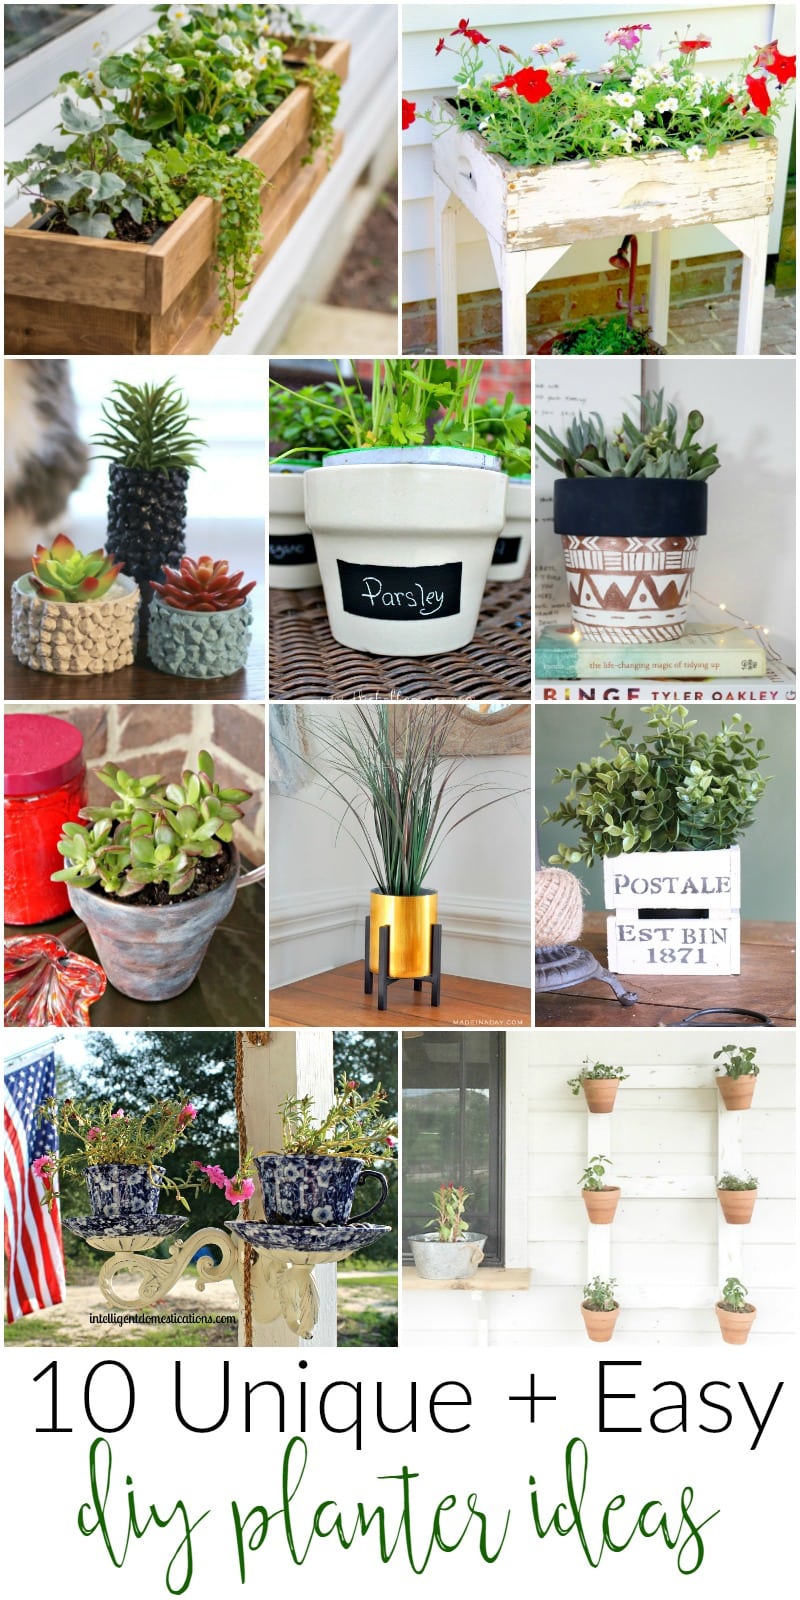 10 unique ideas to make your own planters for around the home, indoor and out!